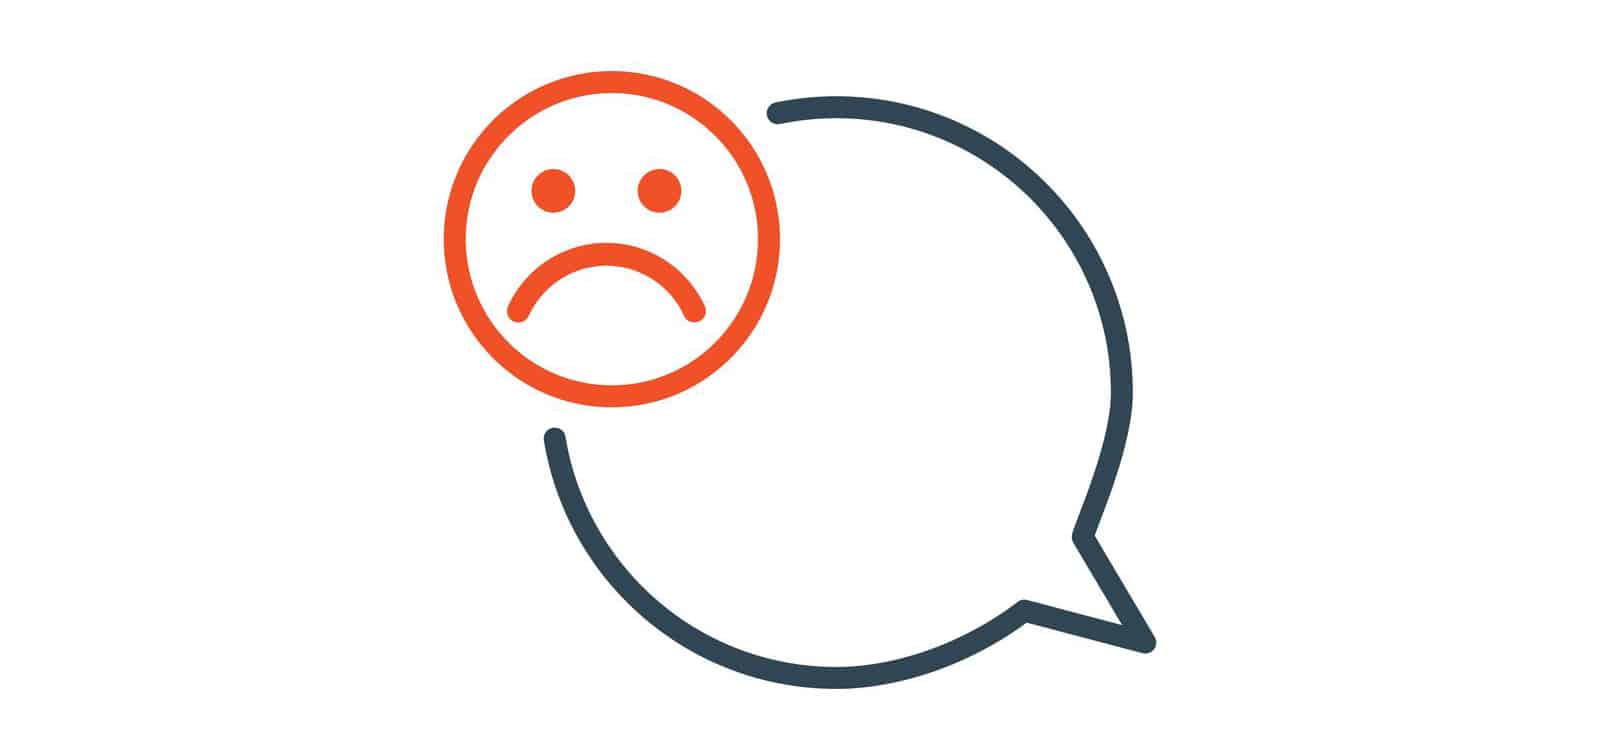 Disadvantages Of Having A Live Chat On Your Website - Pros And Cons Of Having A Live Chat On Your Website